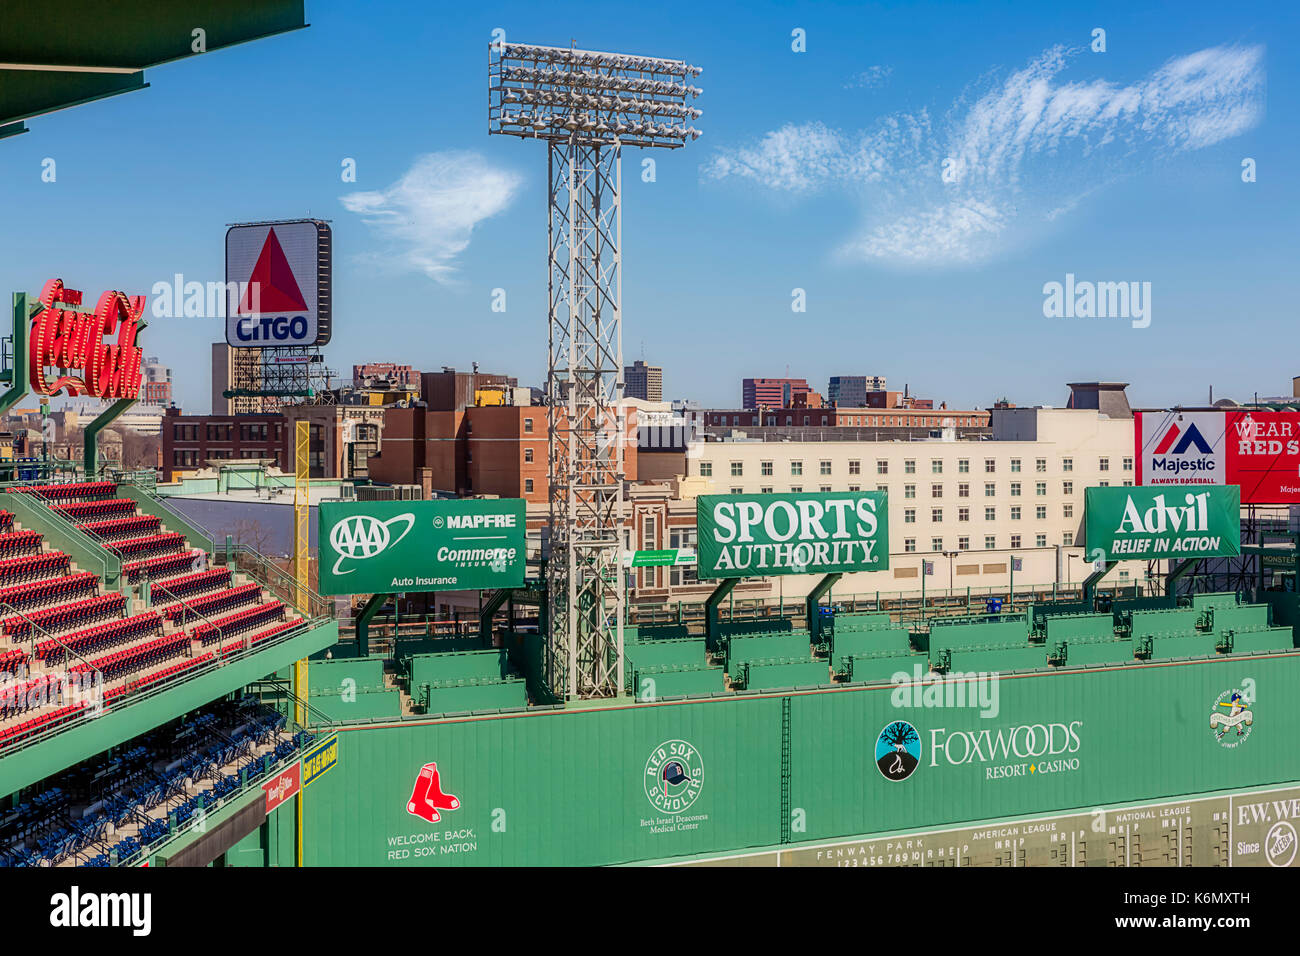 Fenway Park Green Monster Wall - Upper view to the iconic Fenway Park Green  Monster Wall, with the Citgo billboard sign in the background. Fenway Park  is home to the Boston Red